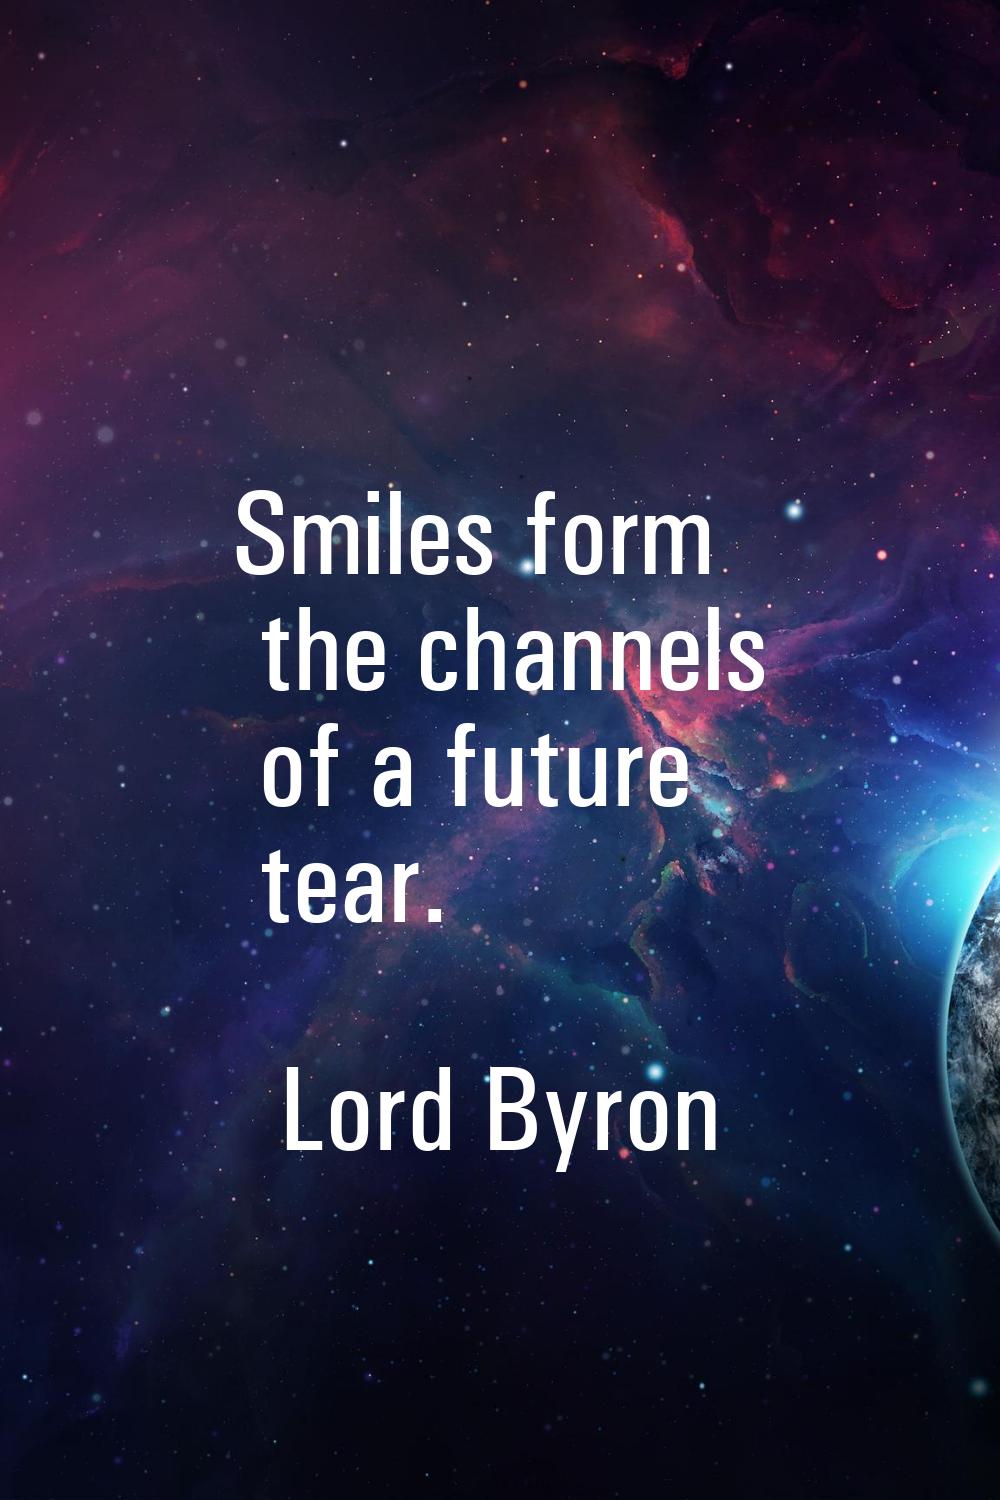 Smiles form the channels of a future tear.